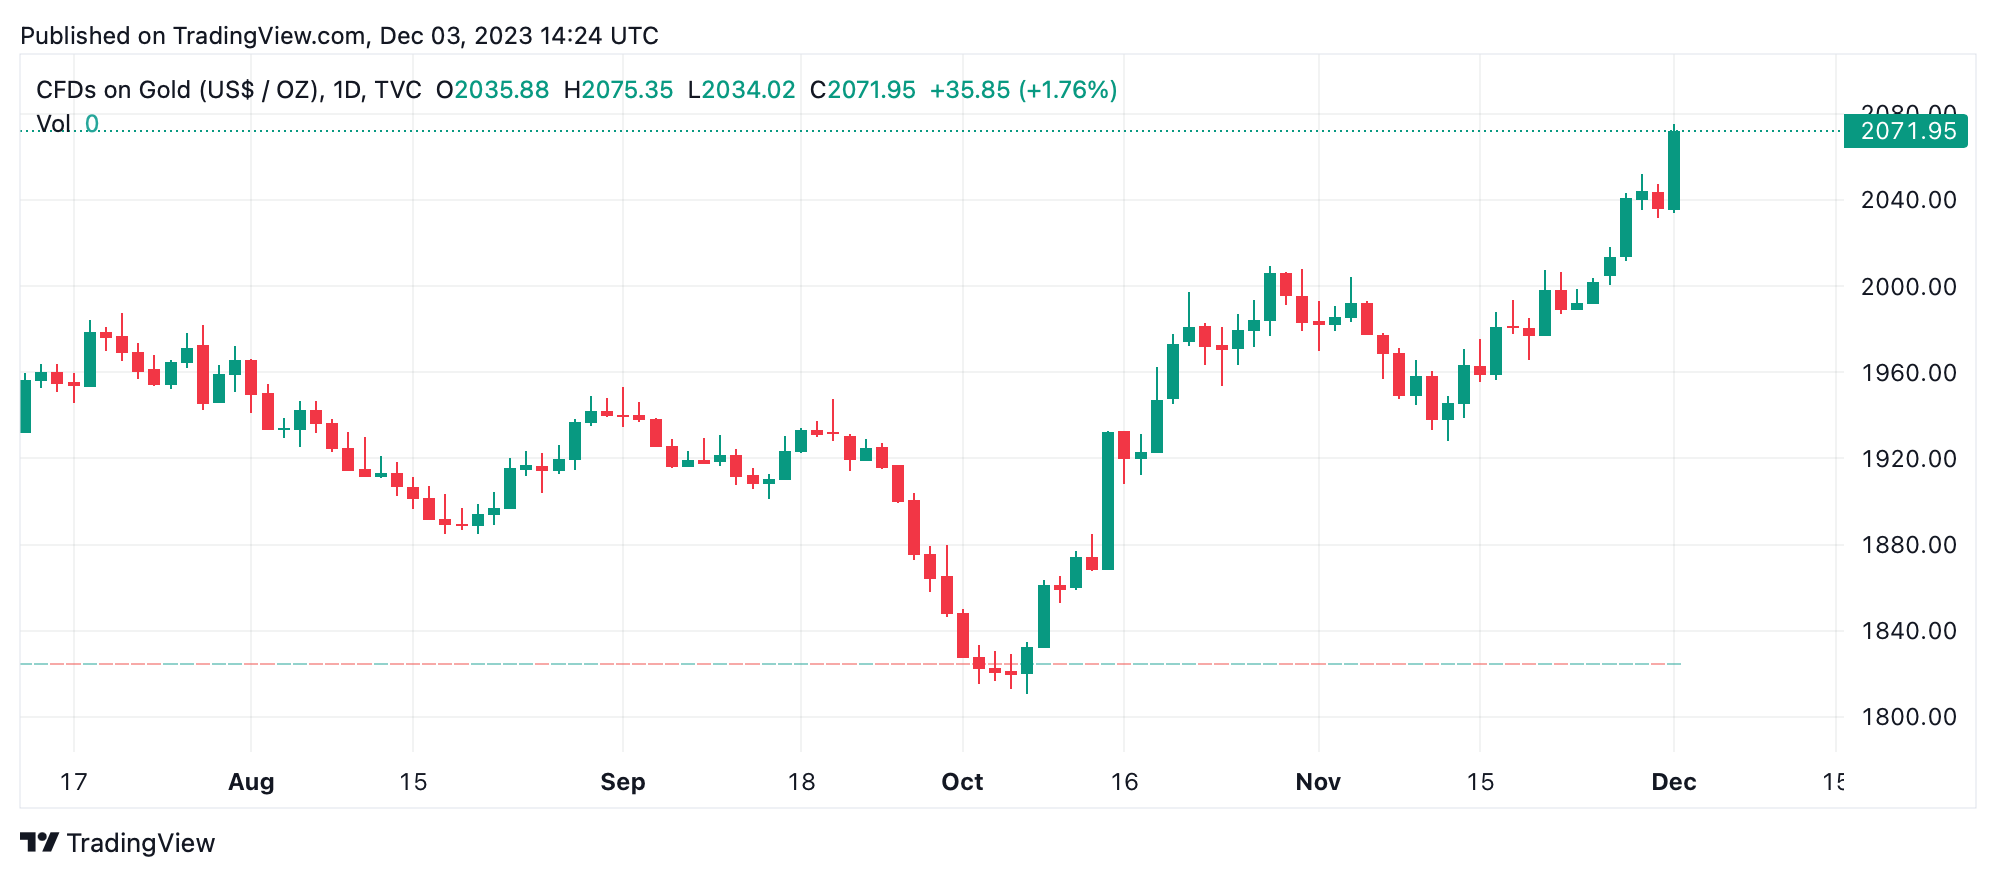 Gold Nears Record High Amid Global Uncertainty, Surges to $2,071 an Ounce